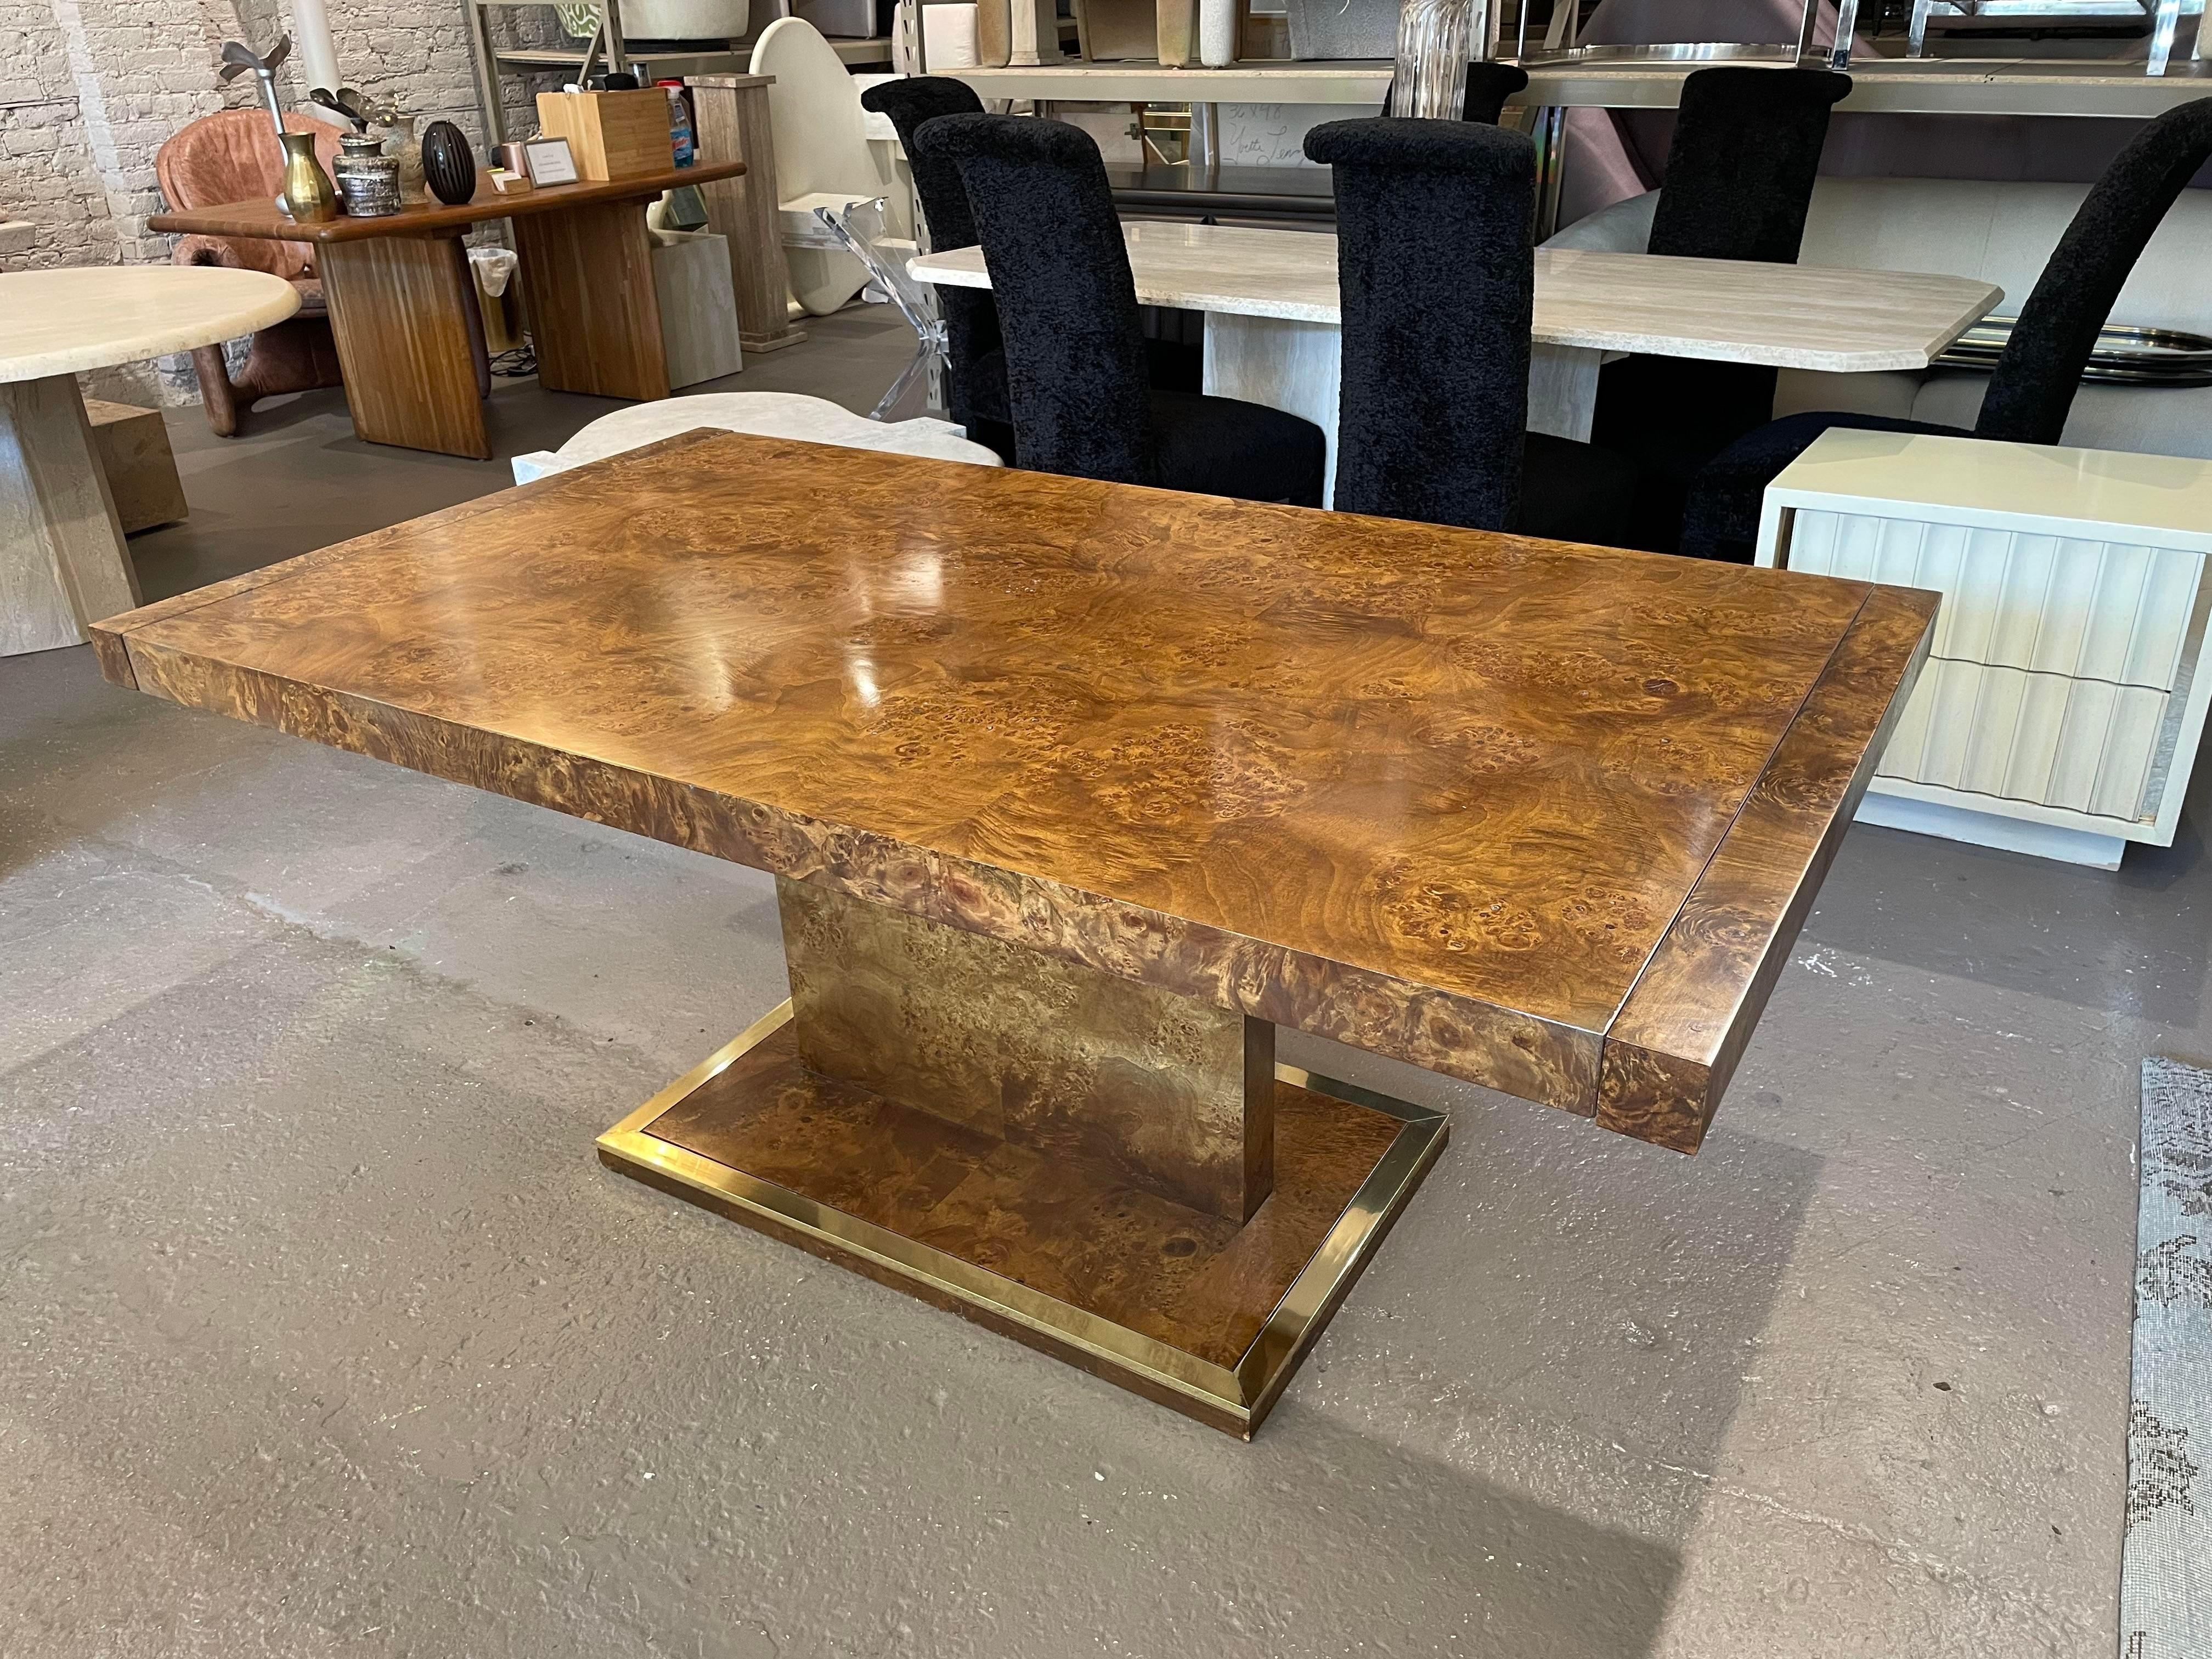 Stunning burled wood and brass extension leaf dining table. This looks like it was never or rarely used. A warm wood color with the slightest amount of brass at the pedestal base makes this a simply dramatic table.

With both leafs in the table is